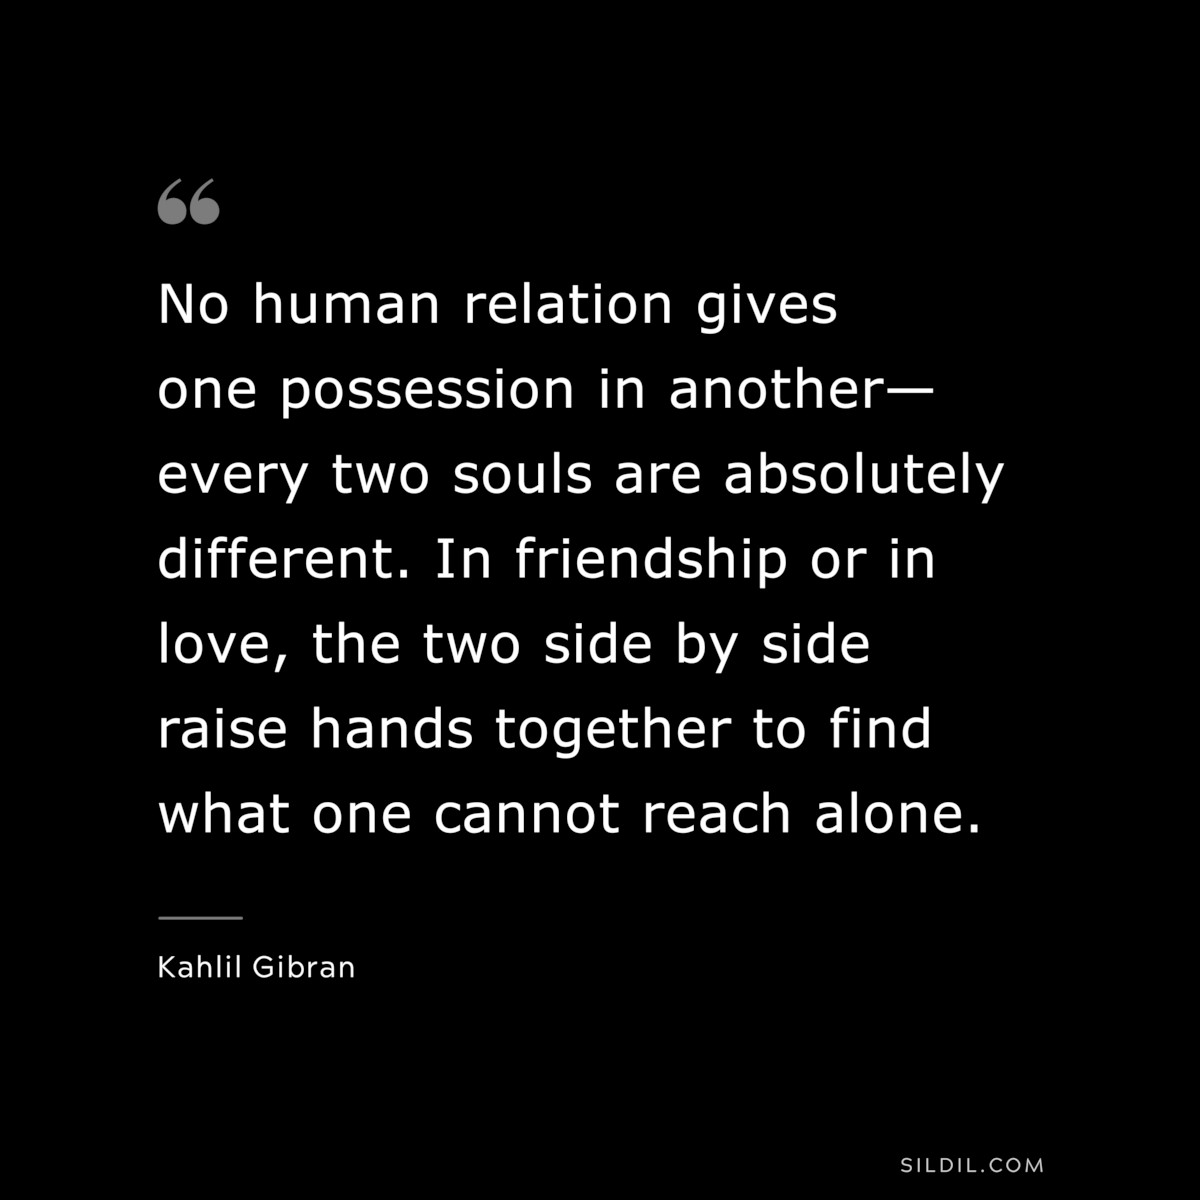 No human relation gives one possession in another—every two souls are absolutely different. In friendship or in love, the two side by side raise hands together to find what one cannot reach alone. ― Kahlil Gibran